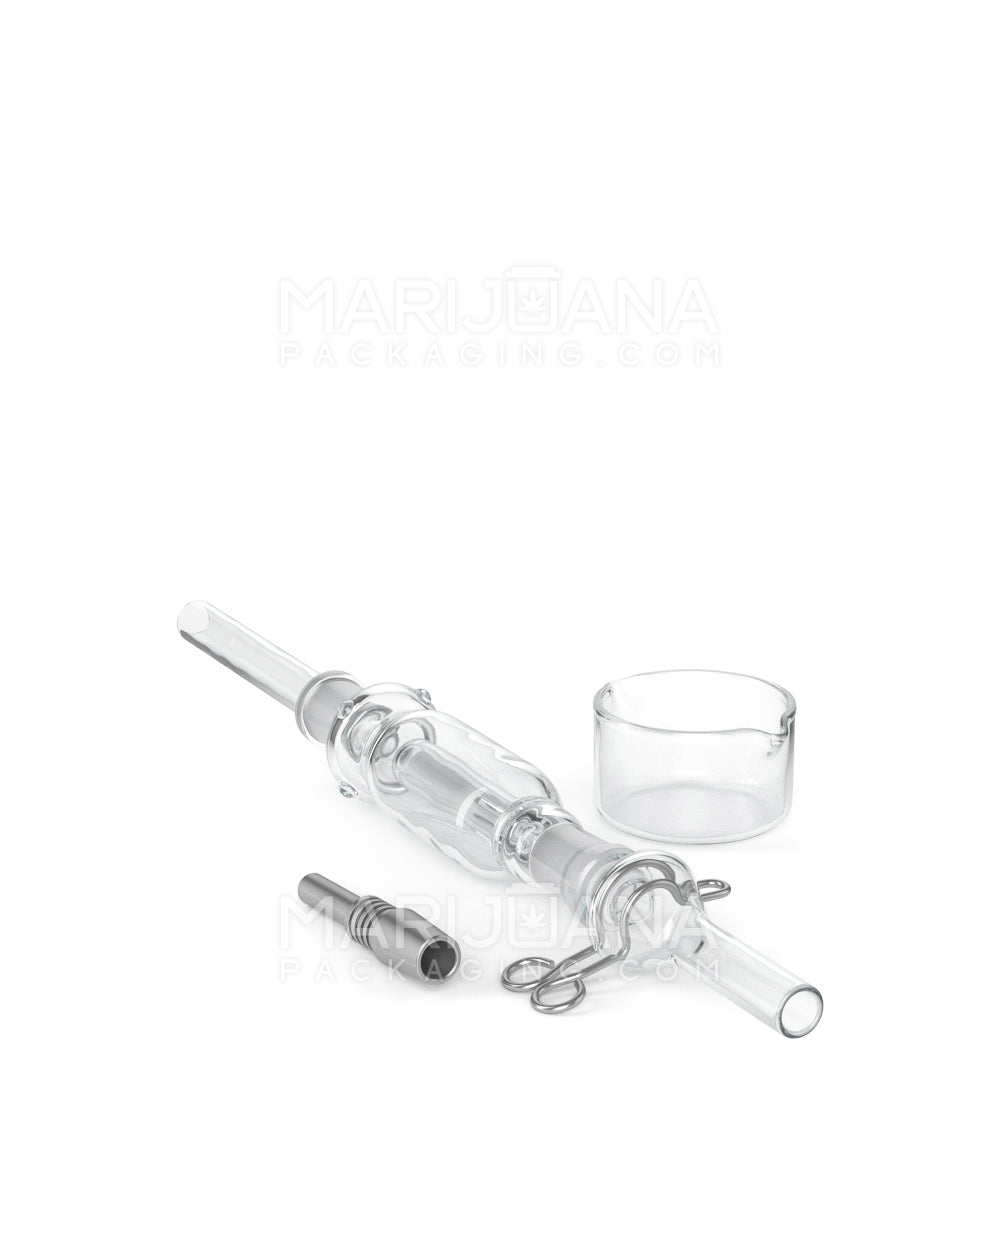 Nectar Collector Dab Pipe | 6in Long - 10mm Attachment - Clear - 8